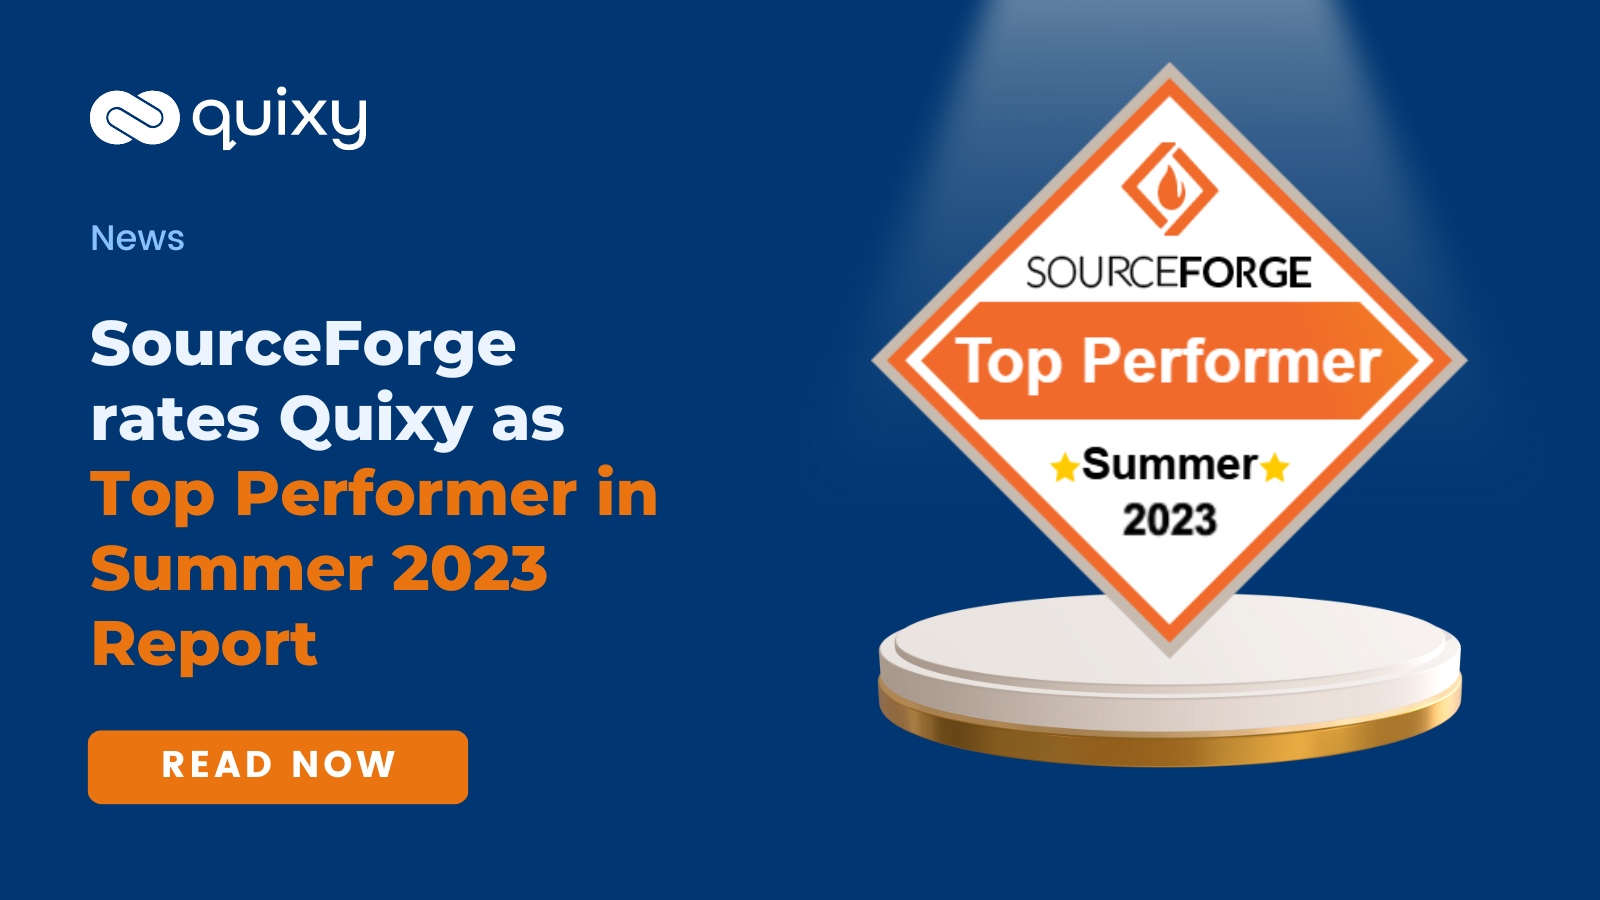 SourceForge rates Quixy as Top Performer in Summer 2023 report | Quixy